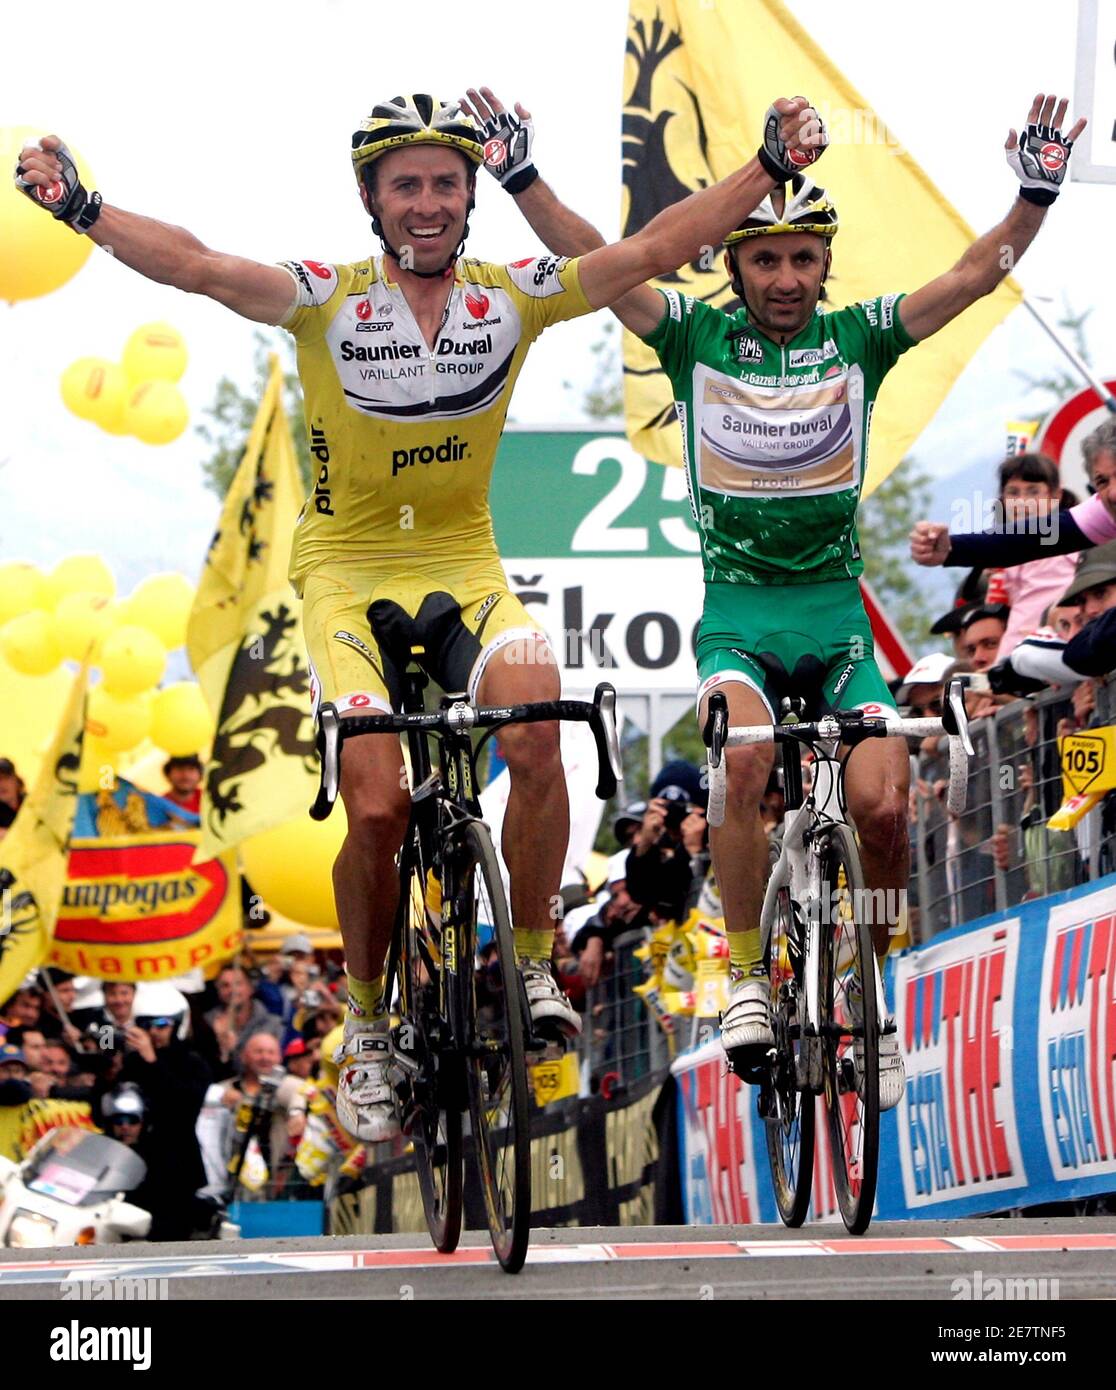 italian-rider-gilberto-simoni-l-celebrates-as-he-crosses-the-finish-line-followed-by-his-team-mate-leonardo-piepoli-after-the-17th-stage-of-the-giro-ditalia-cycling-race-from-lienz-to-monte-zoncolan-may-30-2007-simoni-won-the-stage-while-italian-rider-danilo-di-luca-took-the-leaders-pink-jersey-reutersalessandro-bianchi-italy-2E7TNF5.jpg